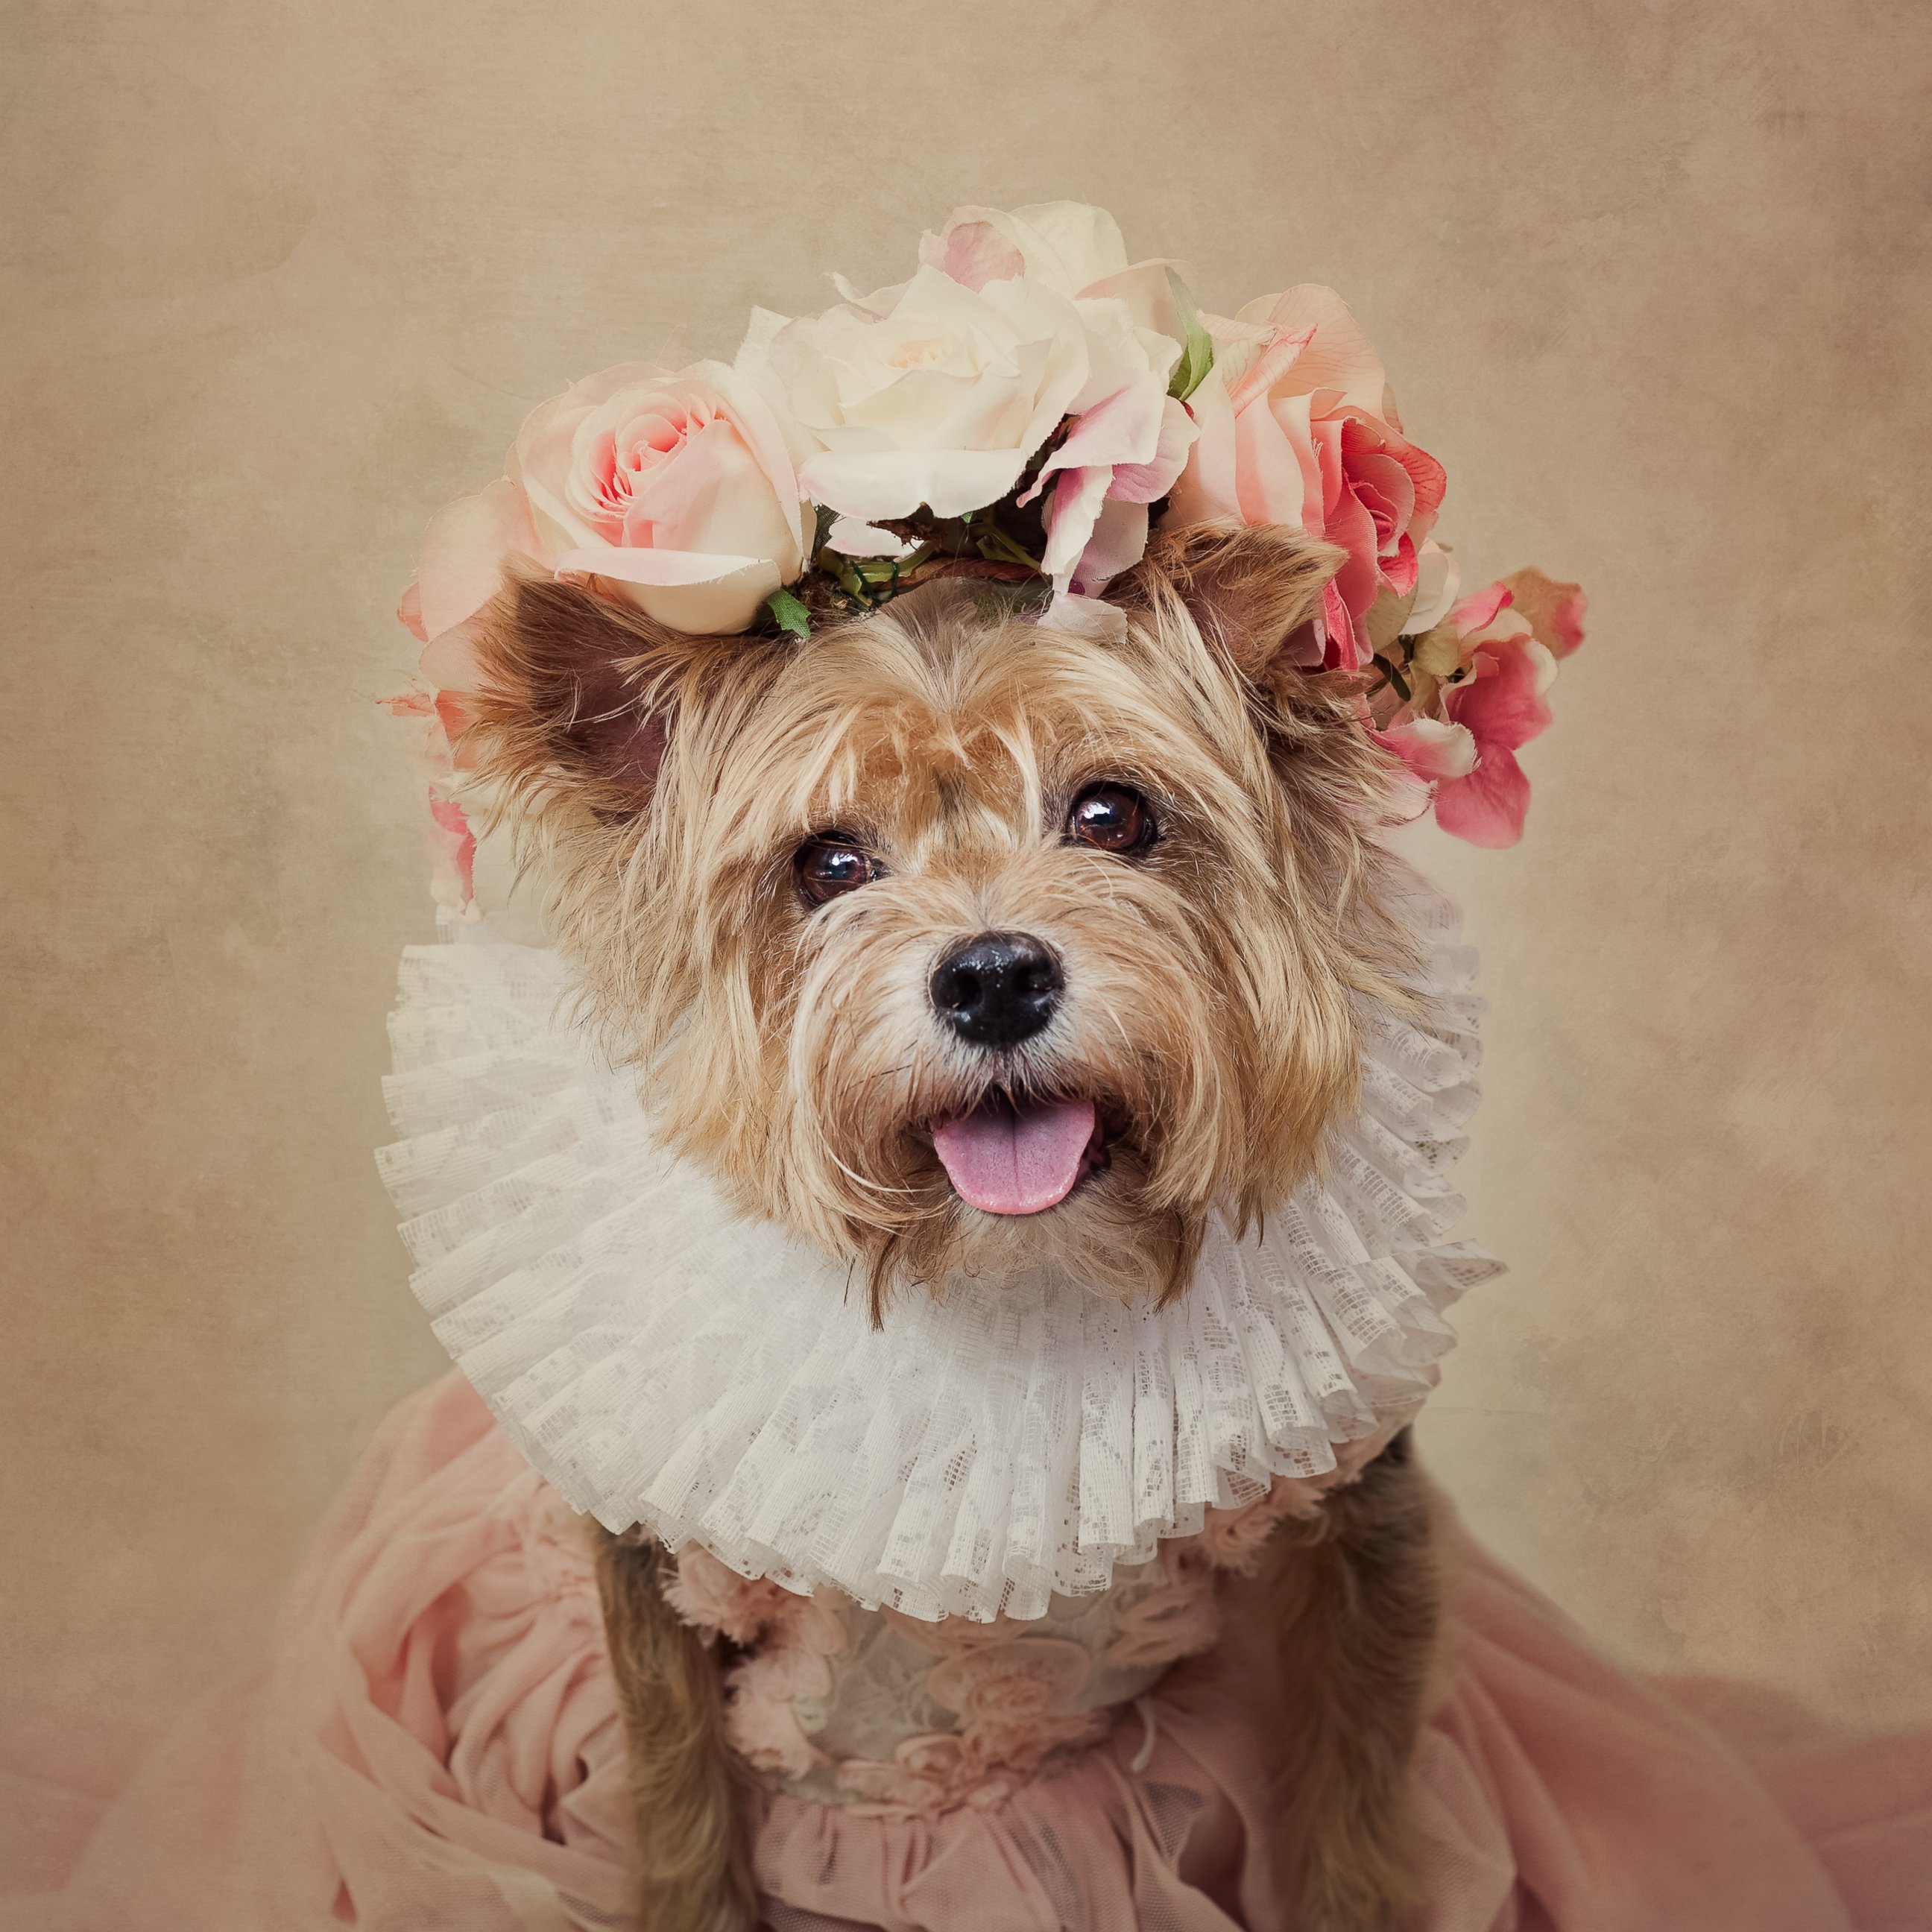 PHOTO: For her Shelter Pets Project, photographer Tammy Swarek is taking these portrait shots of dogs to help them find homes.